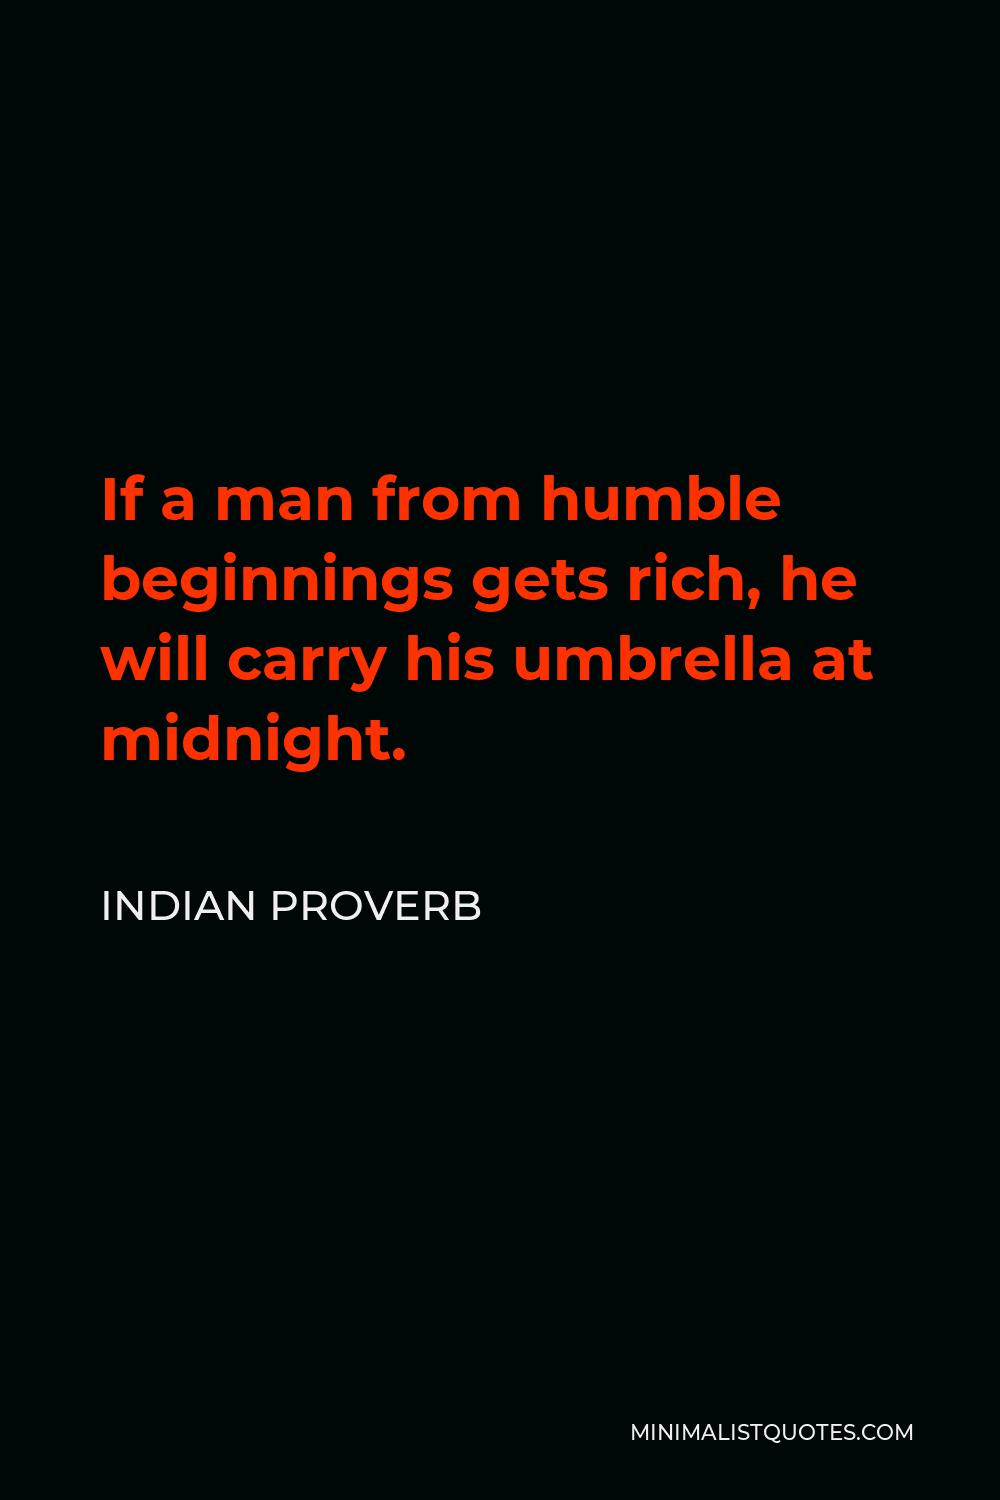 Indian Proverb Quote - If a man from humble beginnings gets rich, he will carry his umbrella at midnight.